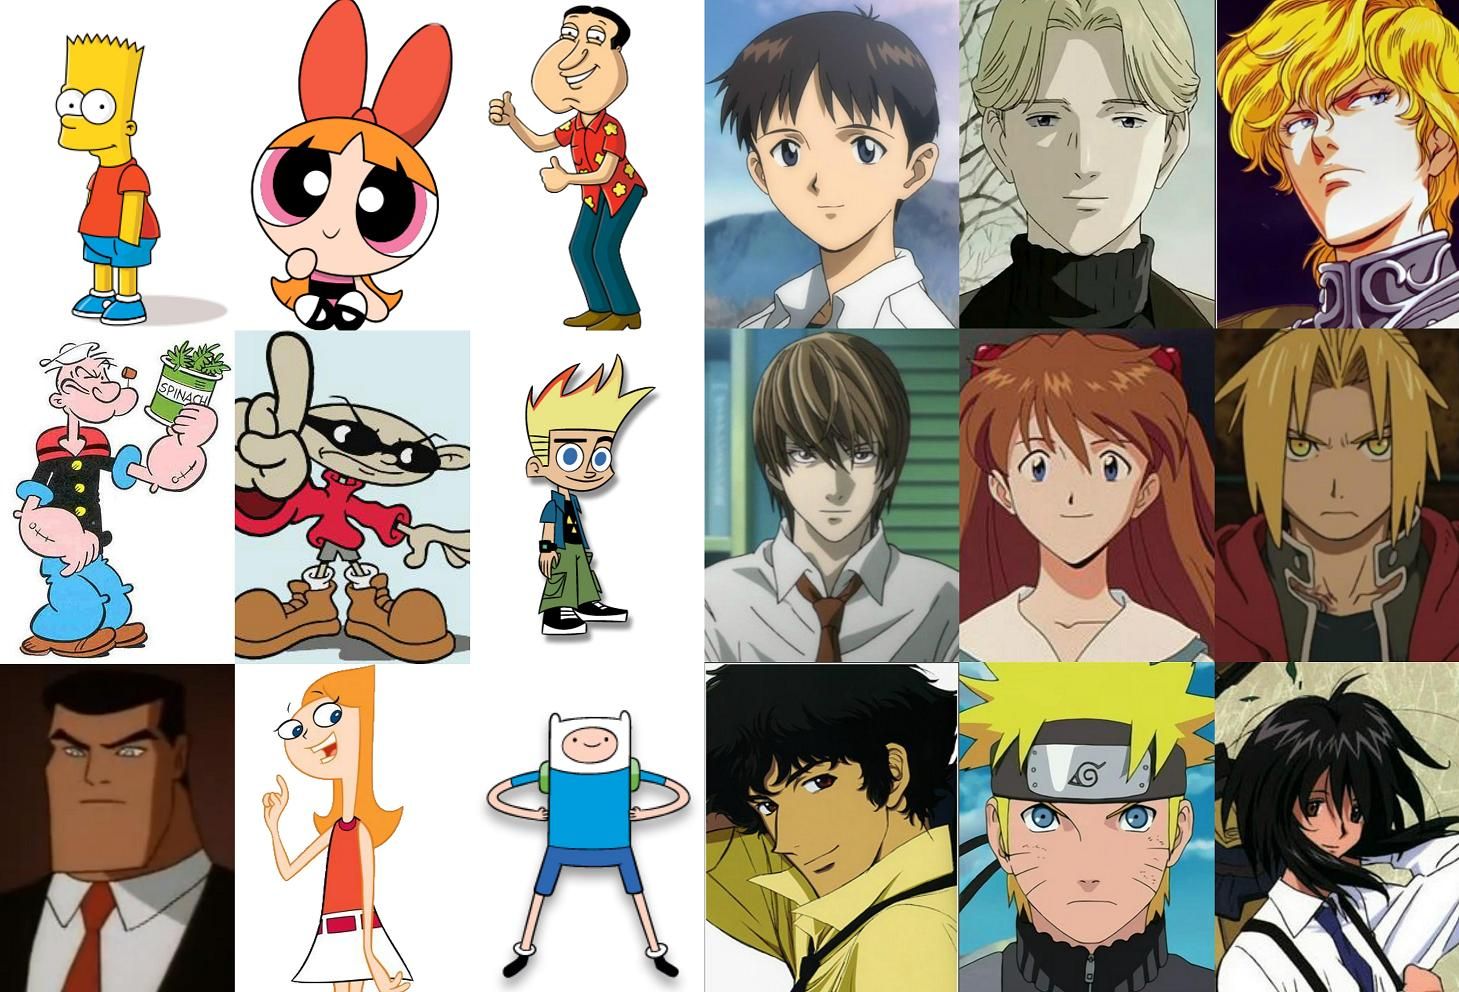 Disney Cartoons vs. Japanese Anime: Which Is Better? - Animated Times